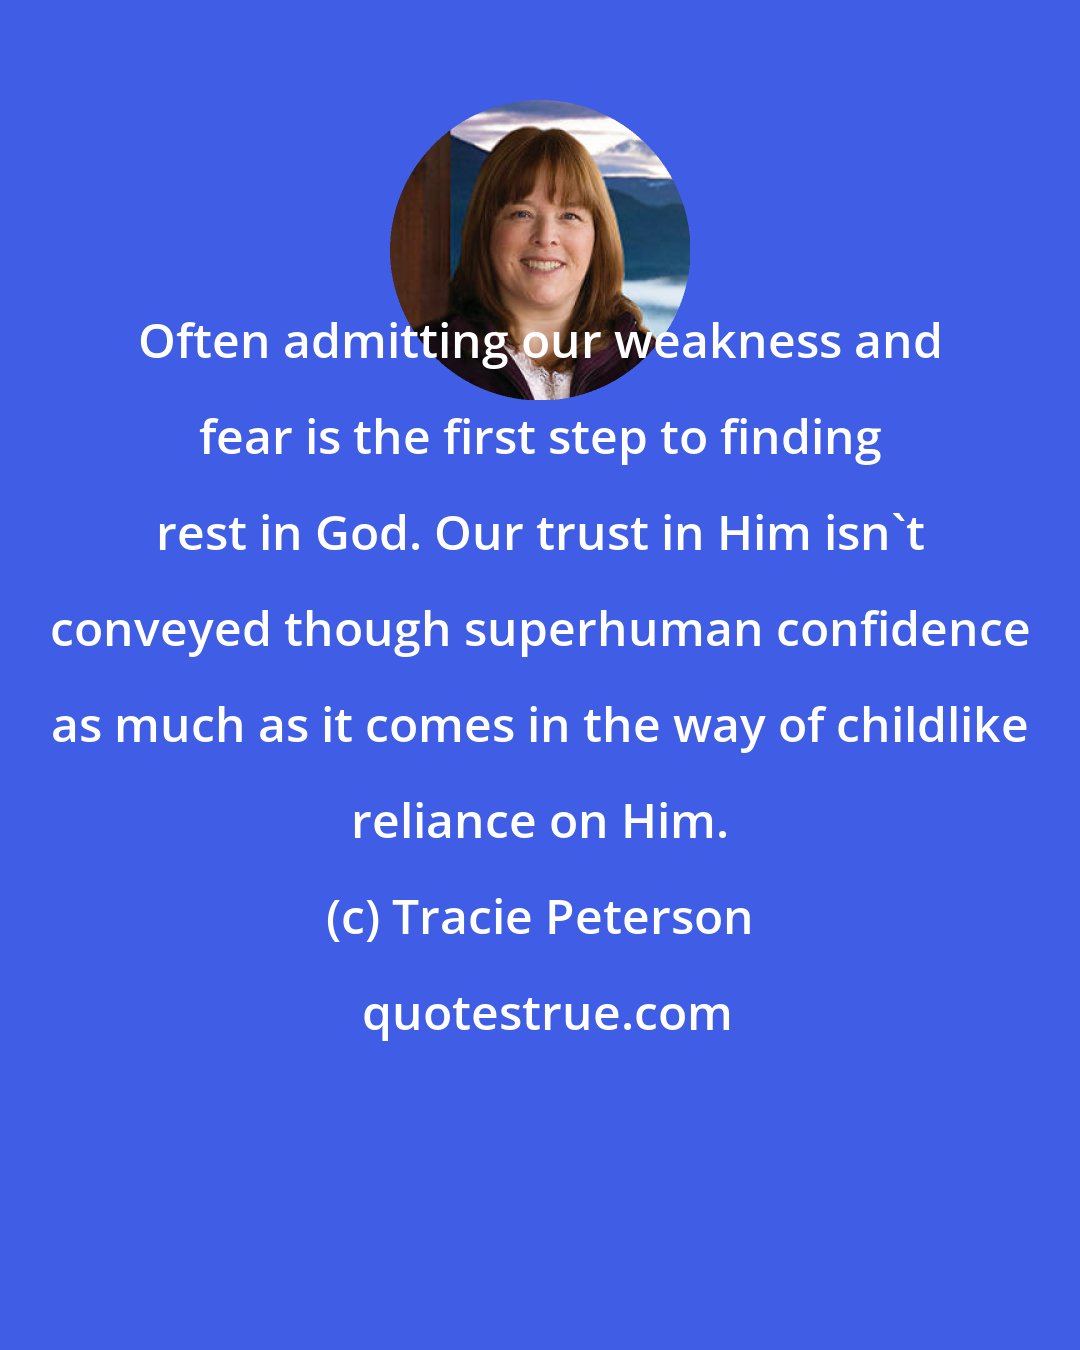 Tracie Peterson: Often admitting our weakness and fear is the first step to finding rest in God. Our trust in Him isn't conveyed though superhuman confidence as much as it comes in the way of childlike reliance on Him.